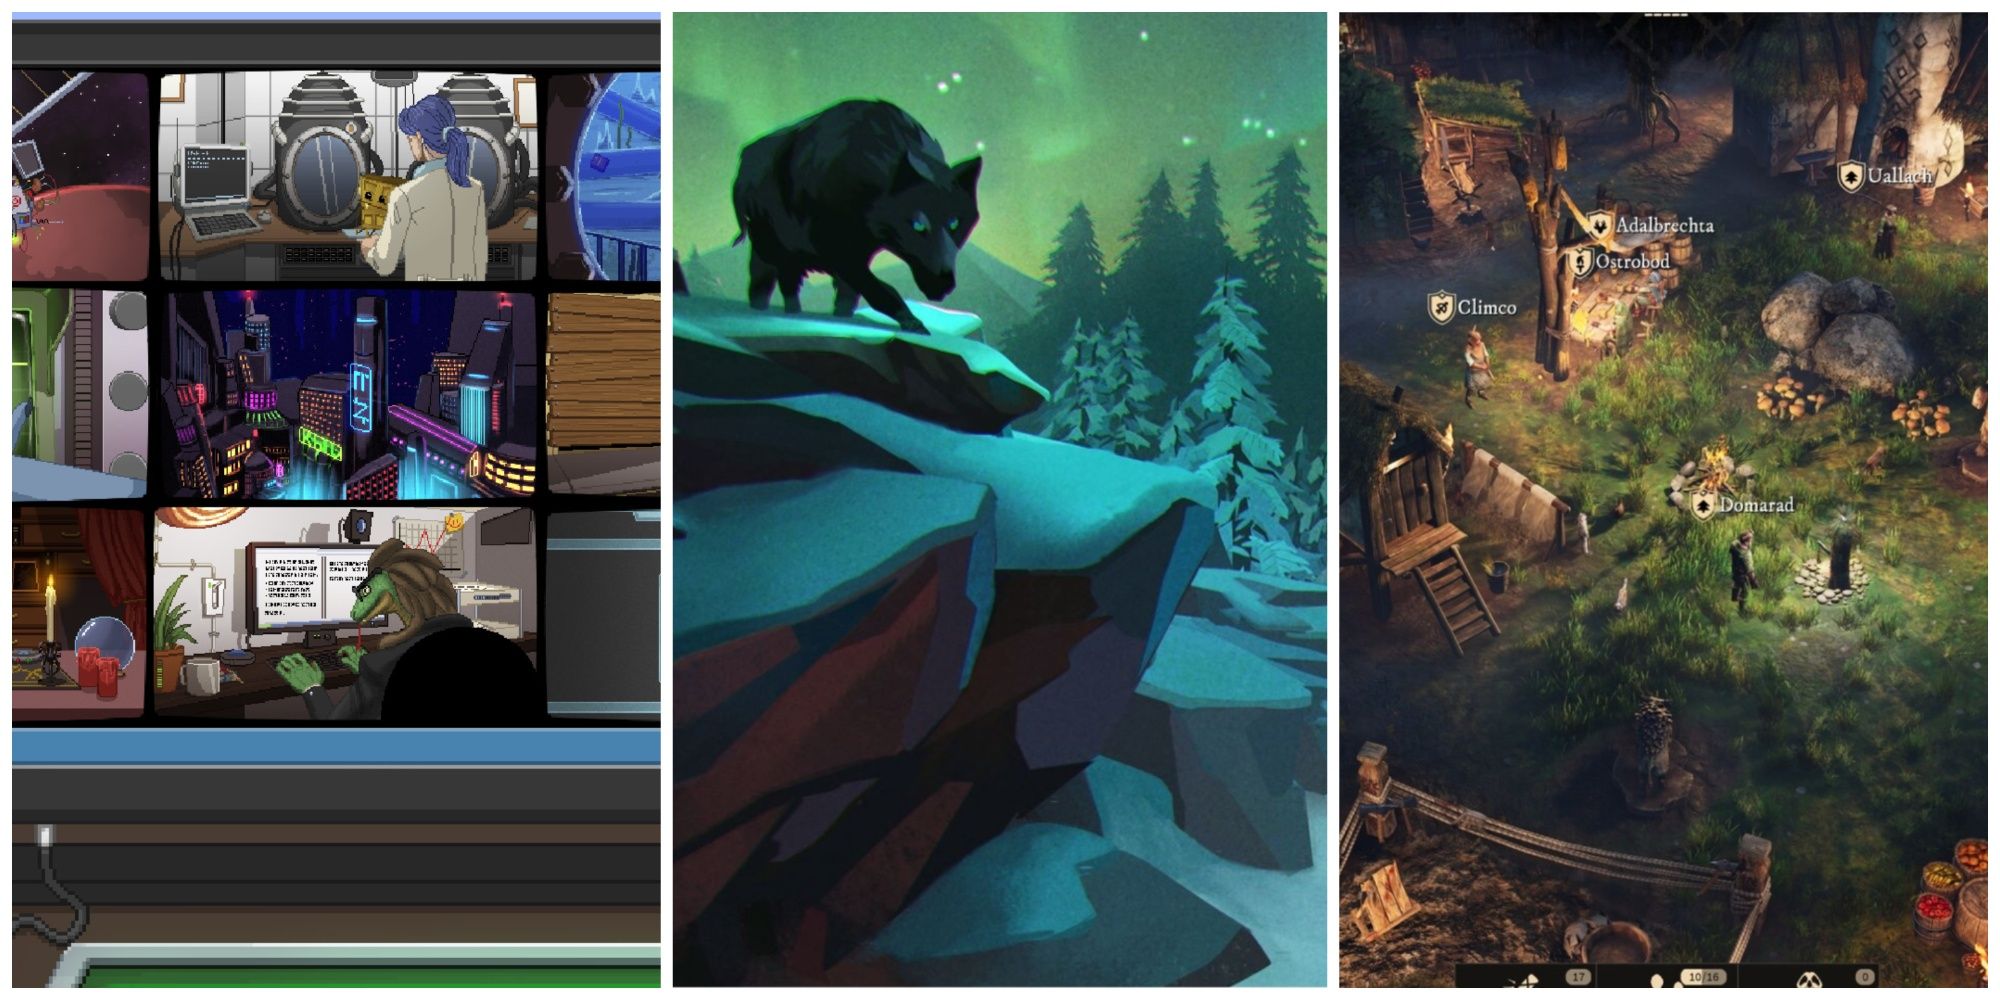 A split between three images, one showing the screens featured in Do Not Feed The Monkeys 2099, one showing wolves from The Long Dark, and one focused on a village in Gord